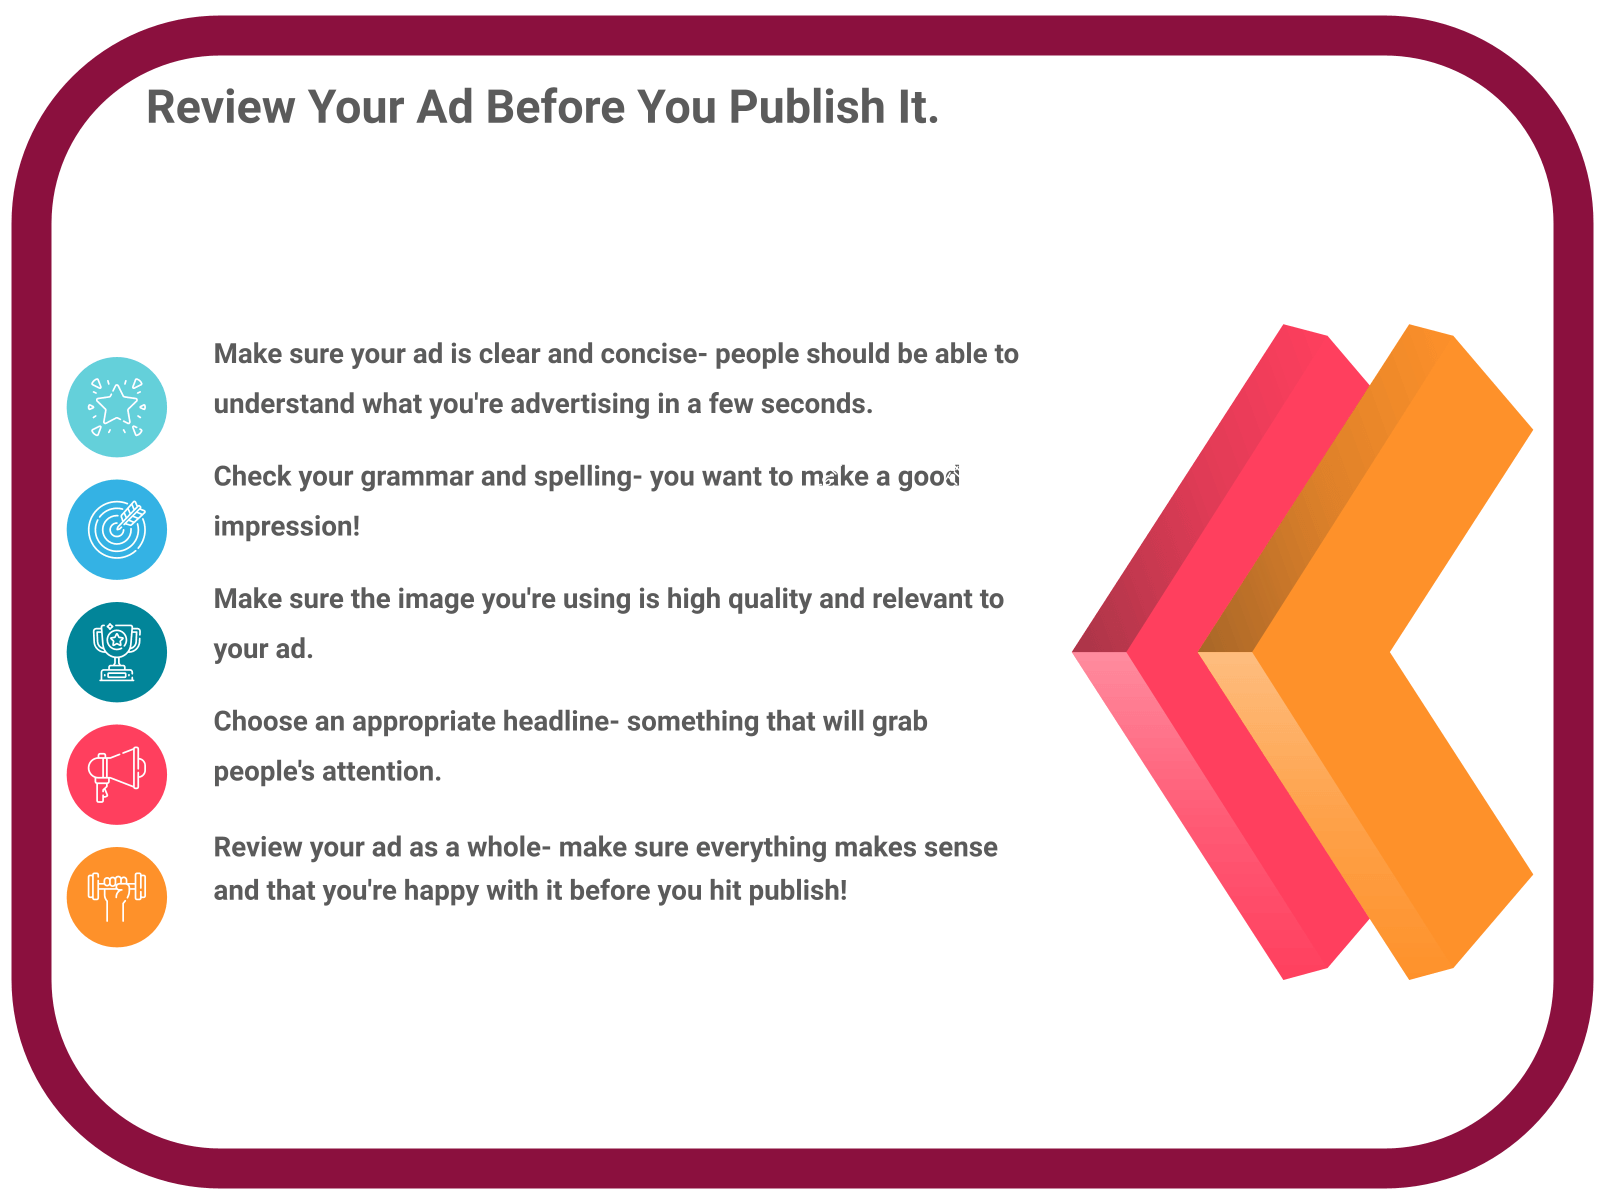 INFOGRAPHIC: Review your ad before you publish it. - Poll the People